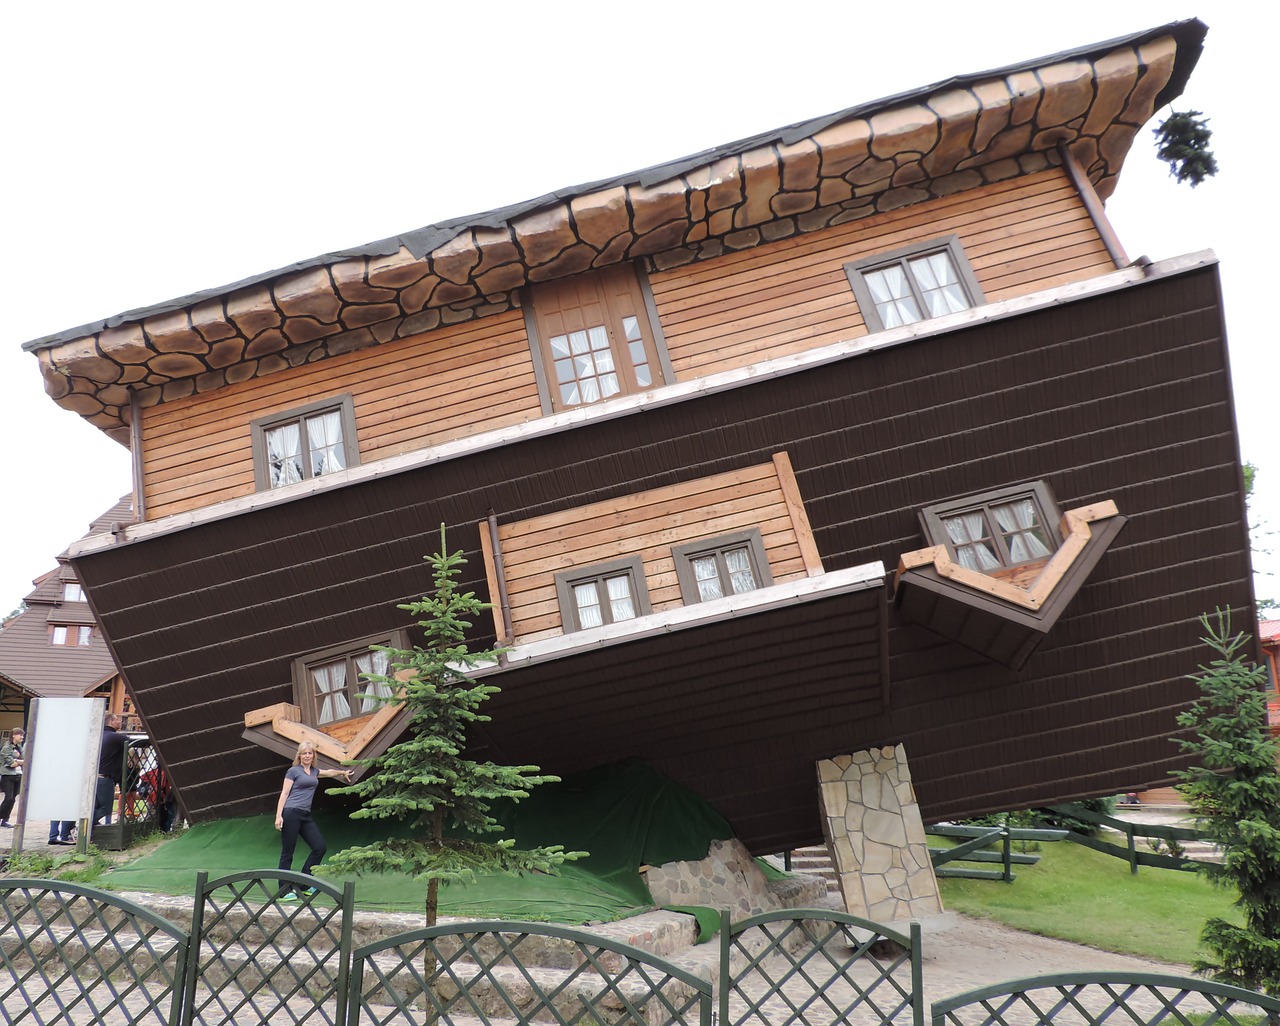 house inverted wooden construction free photo